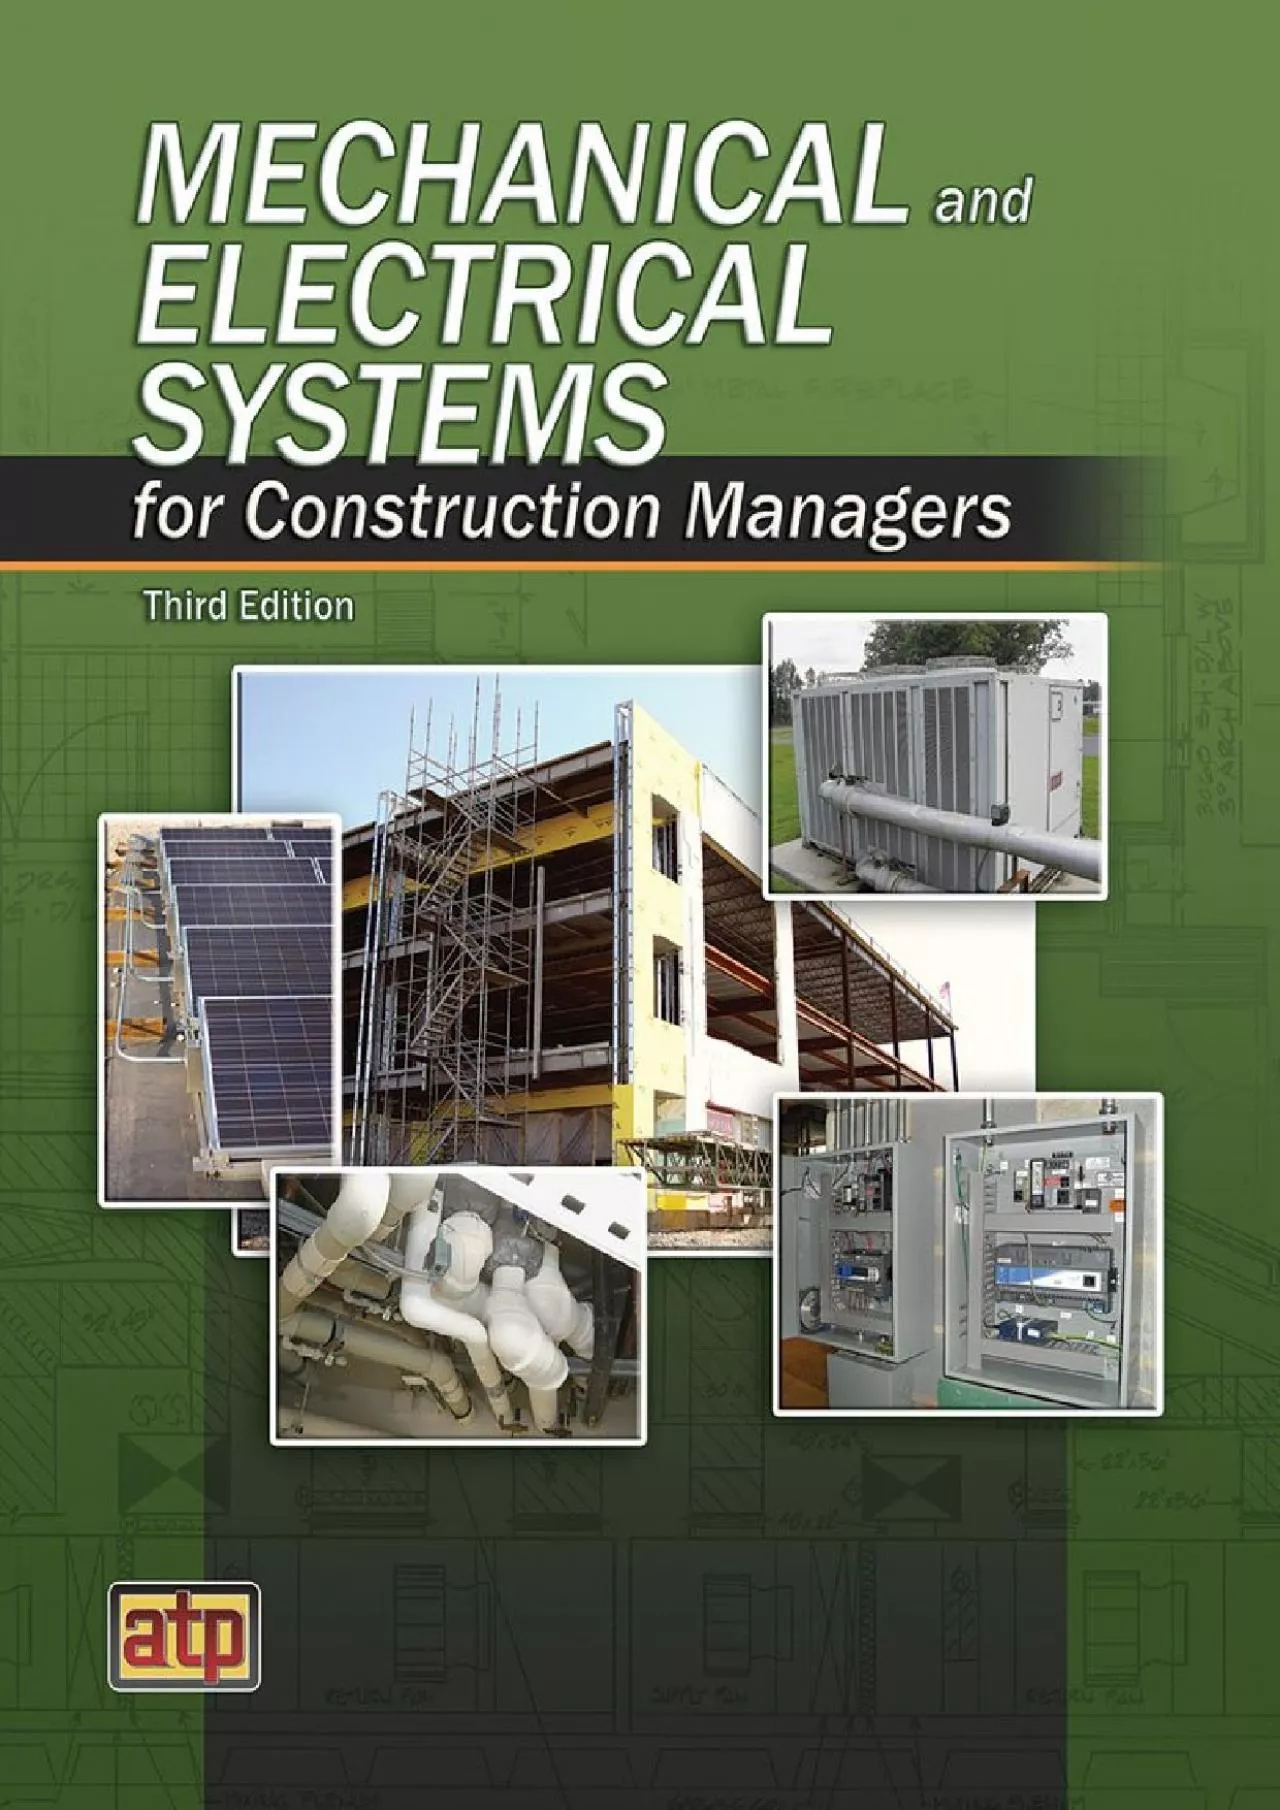 [EBOOK] Mechanical and Electrical Systems for Construction Managers